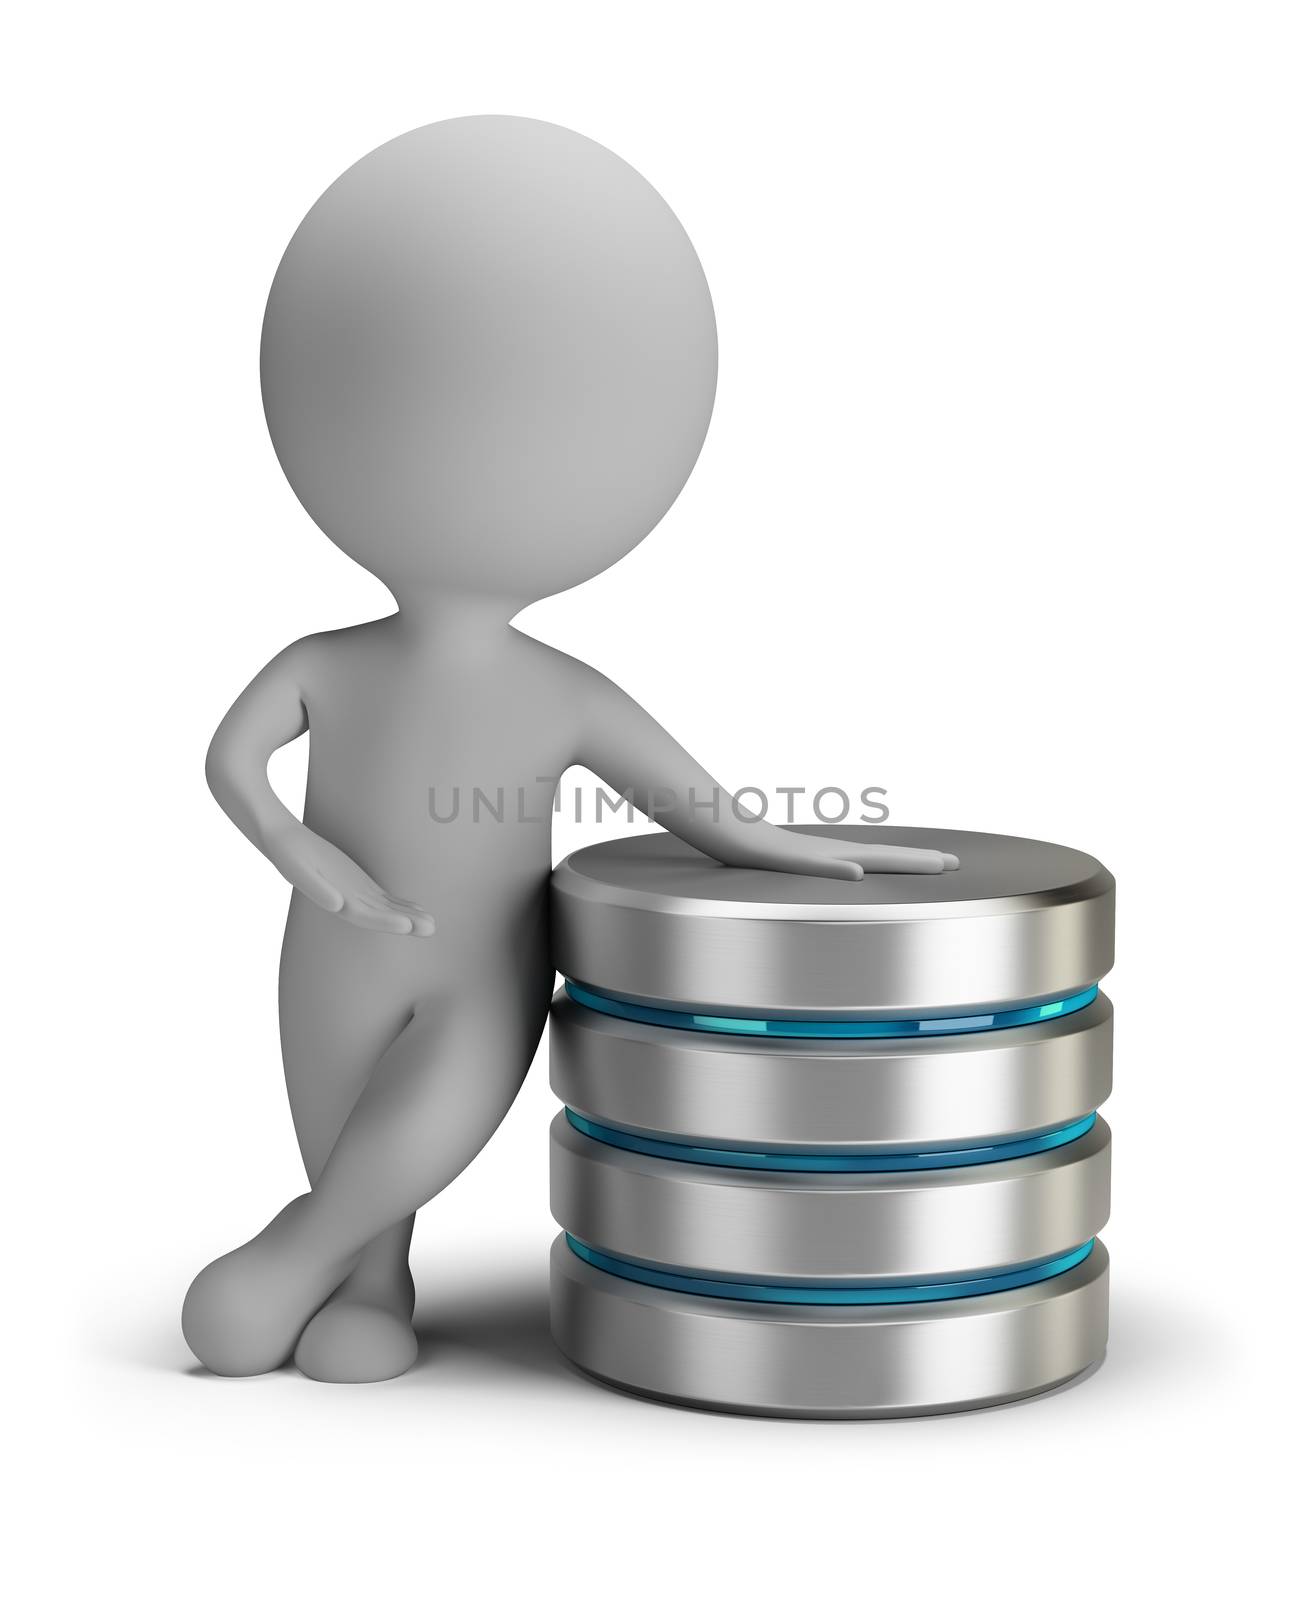 3d person standing next to the server. 3d image. Isolated white background.